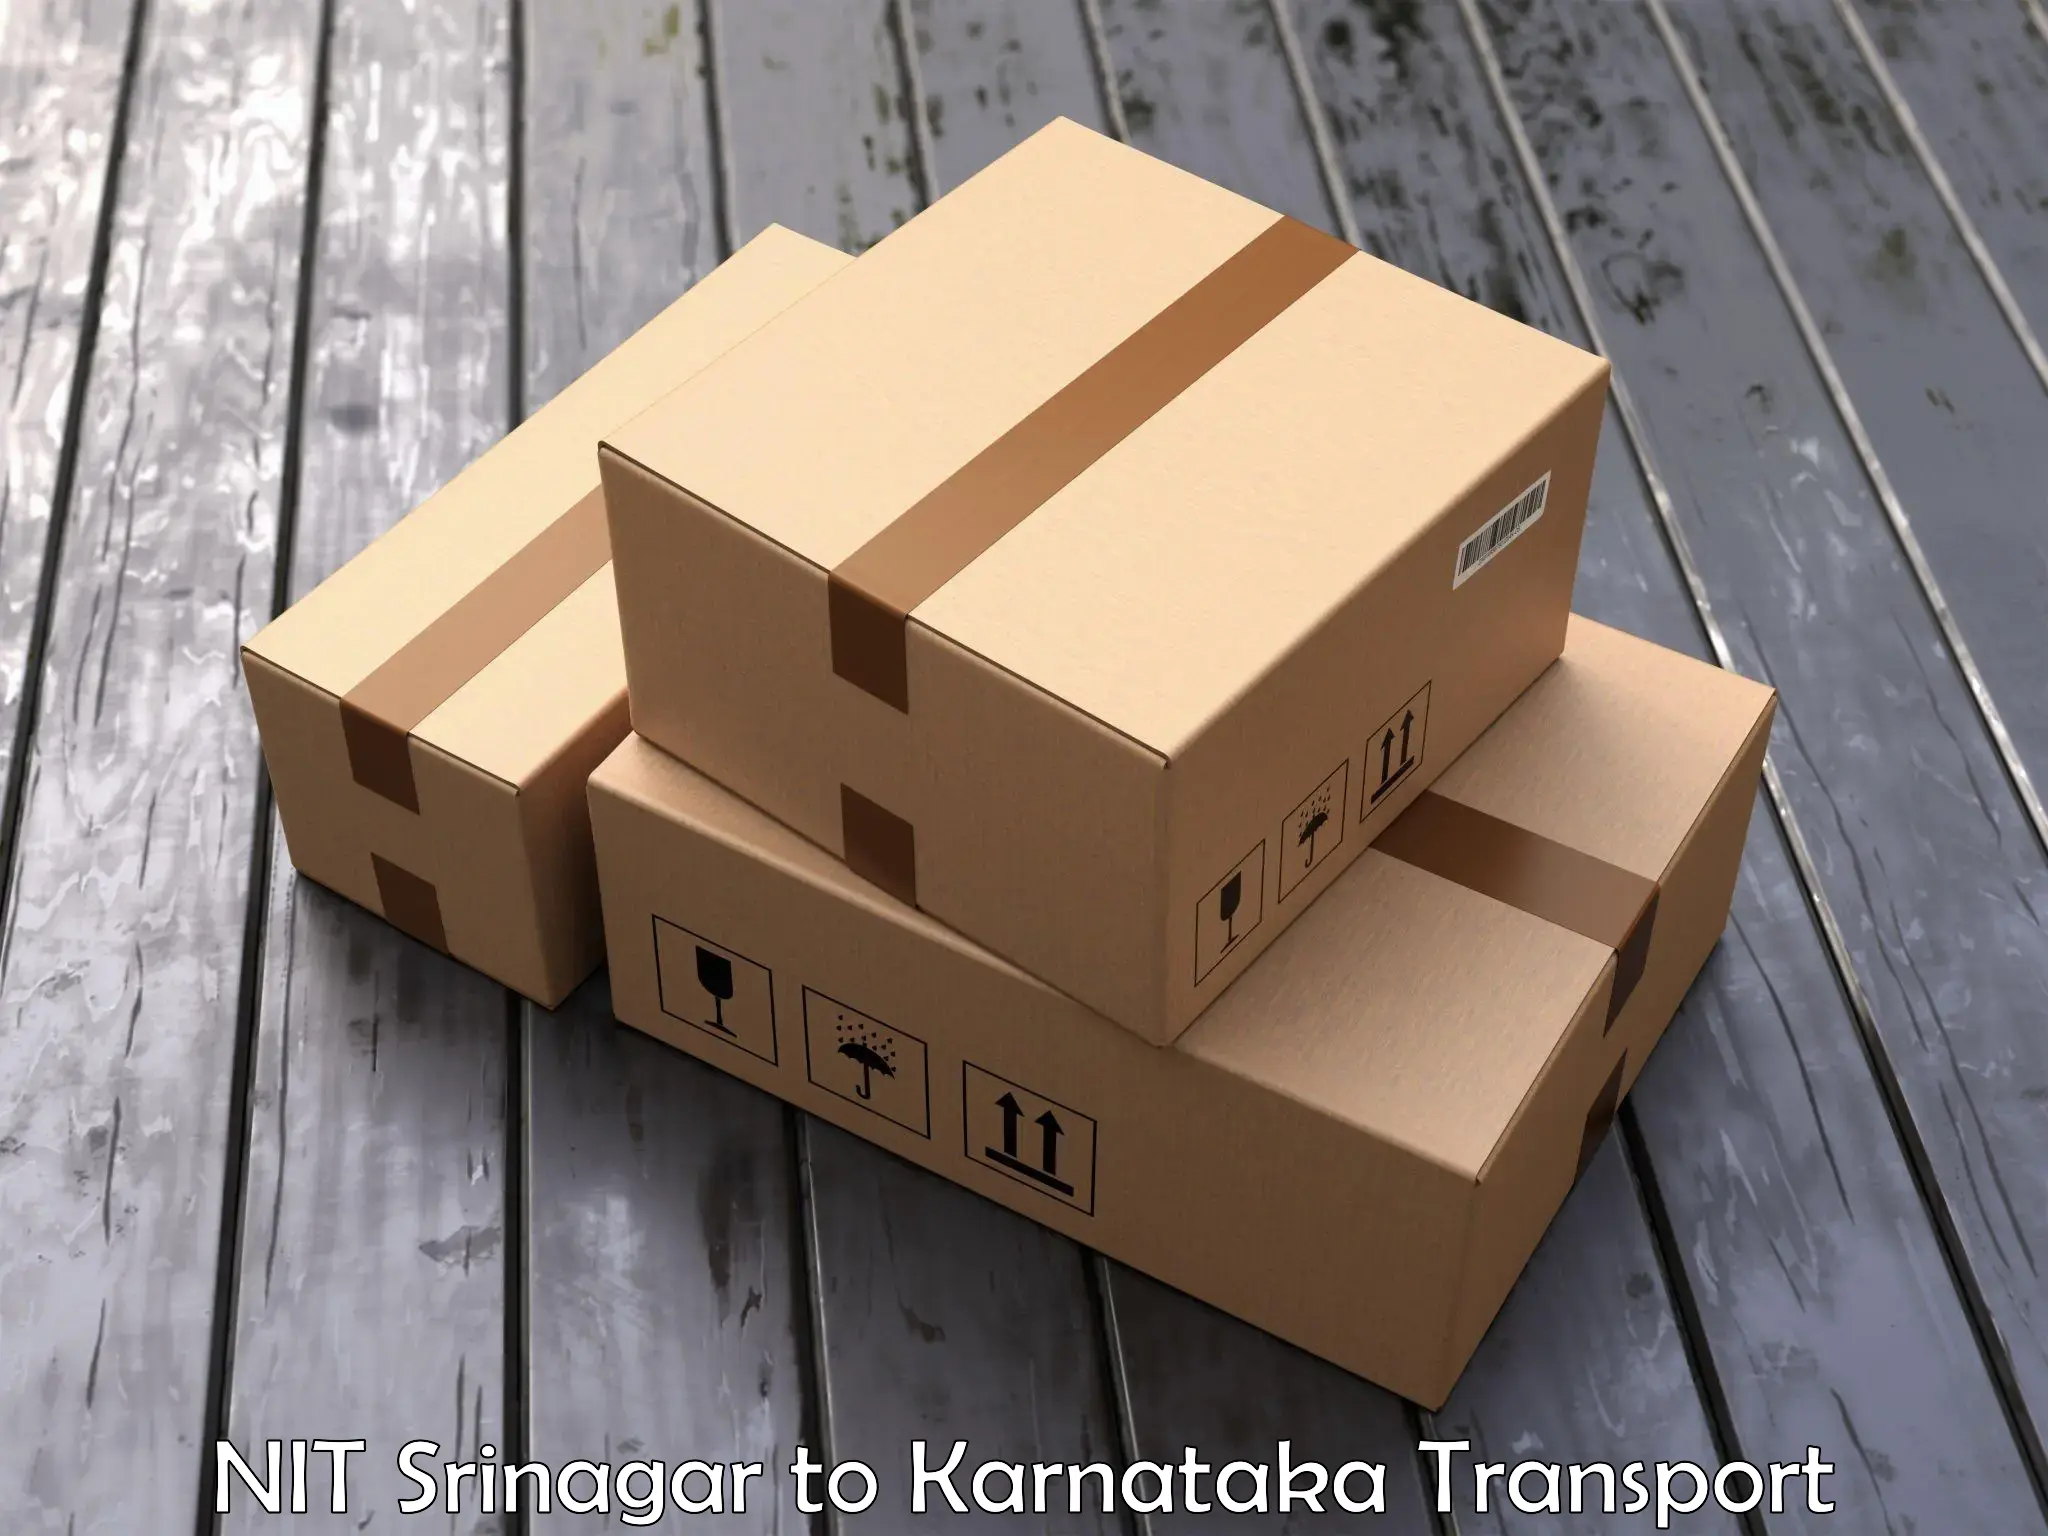 Vehicle transport services in NIT Srinagar to Channapatna